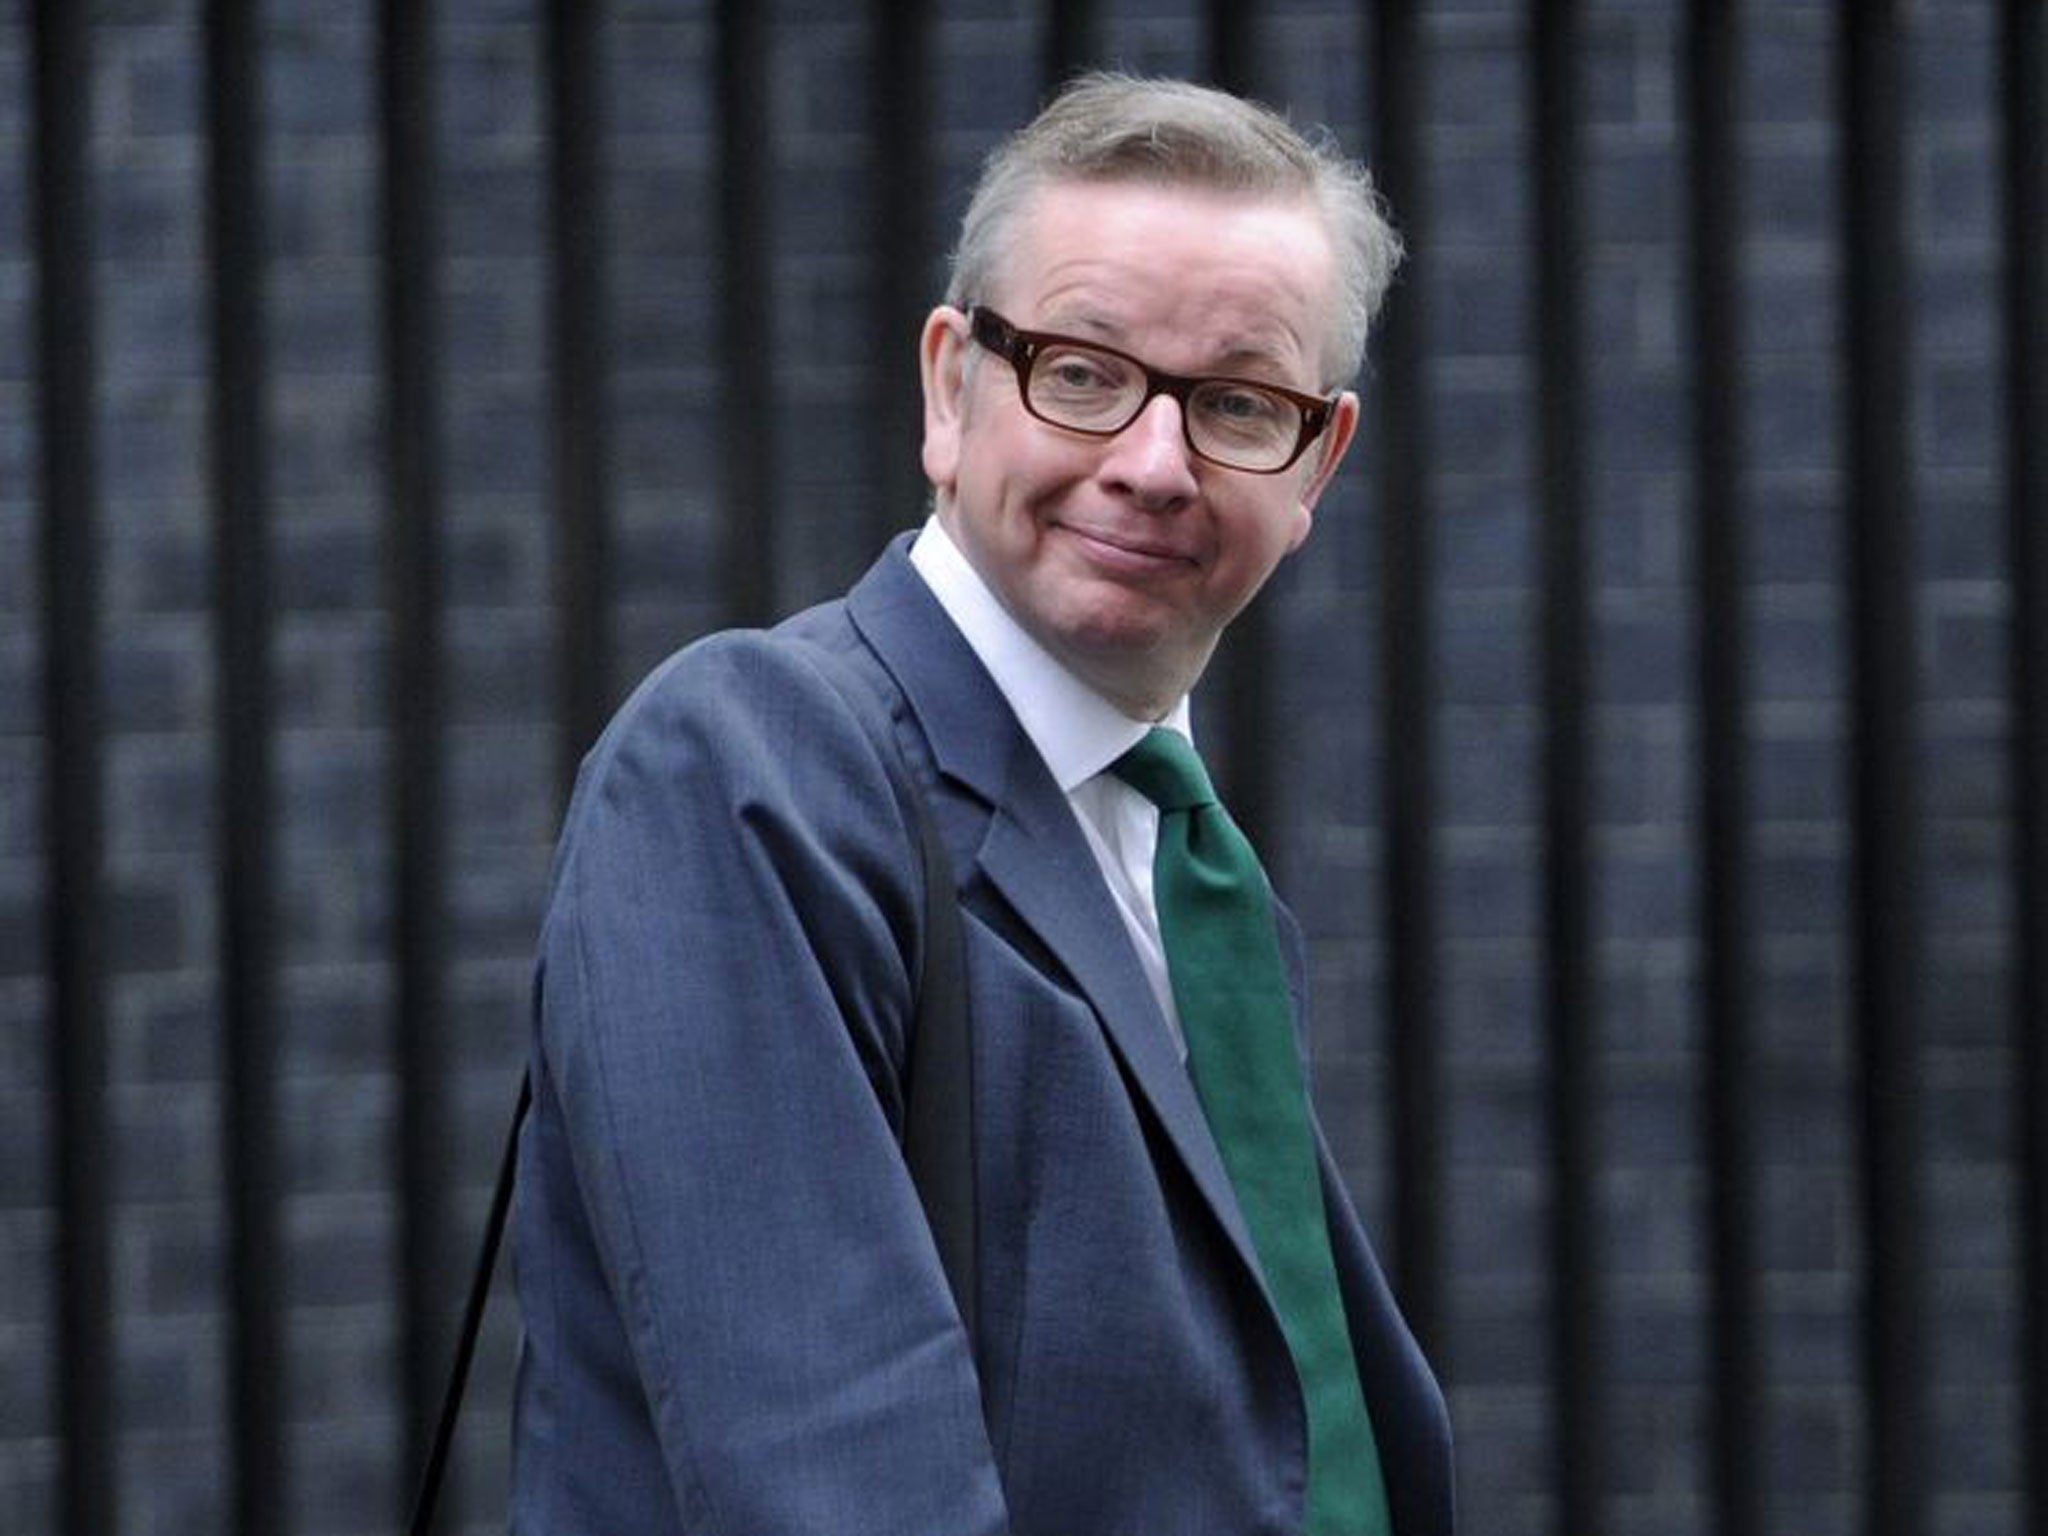 Michael Gove has suggested Moocs be used in schools to broaden the curriculum